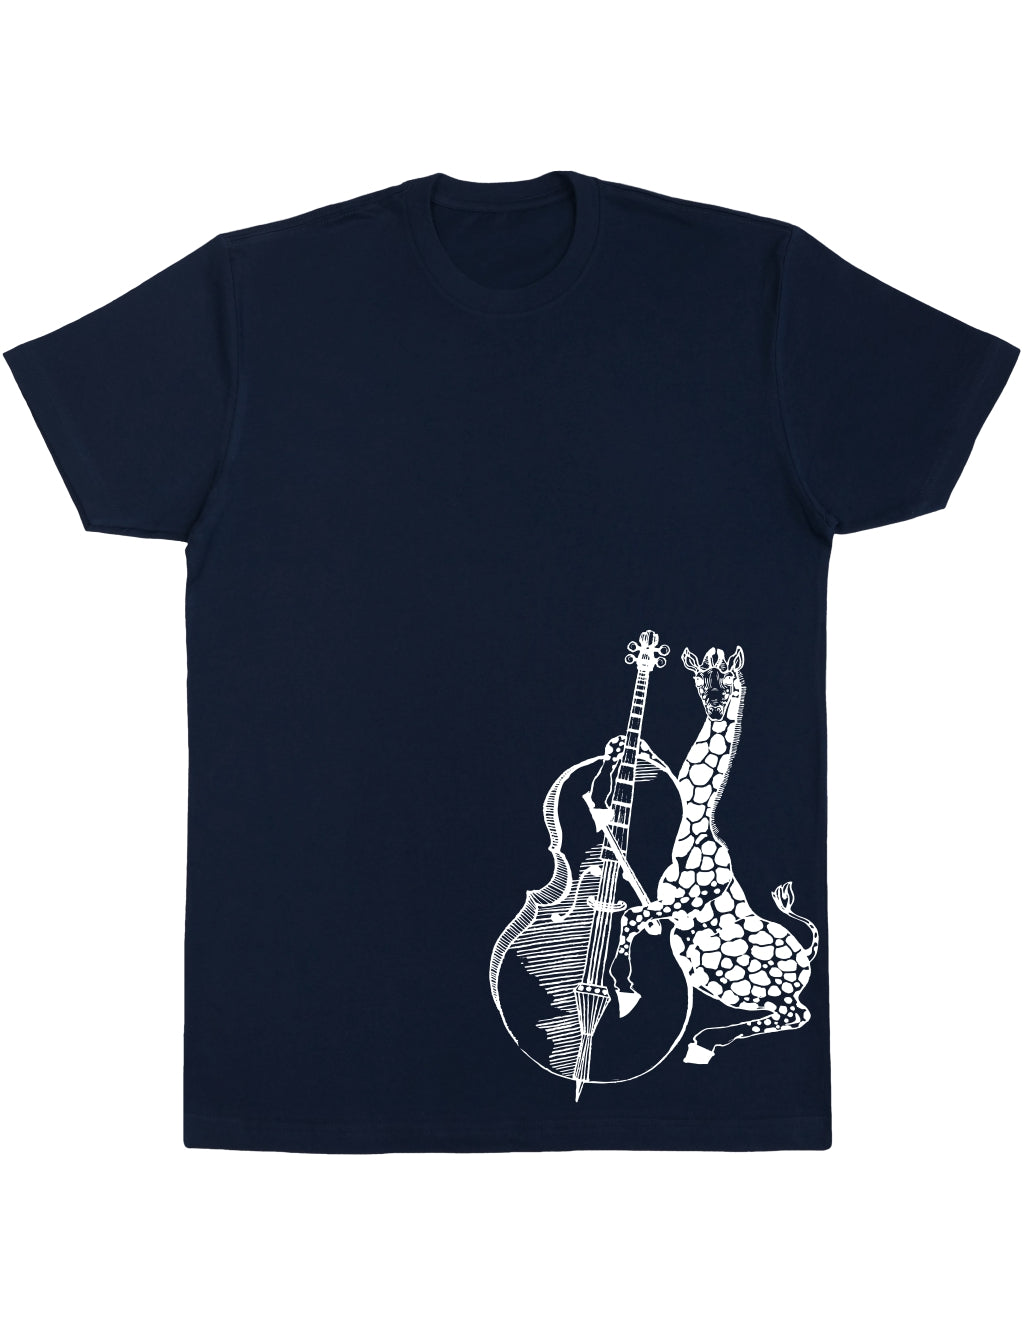 seembo-t-shirt-navy-with-giraffe-playing-cello-cellist-art-on-it